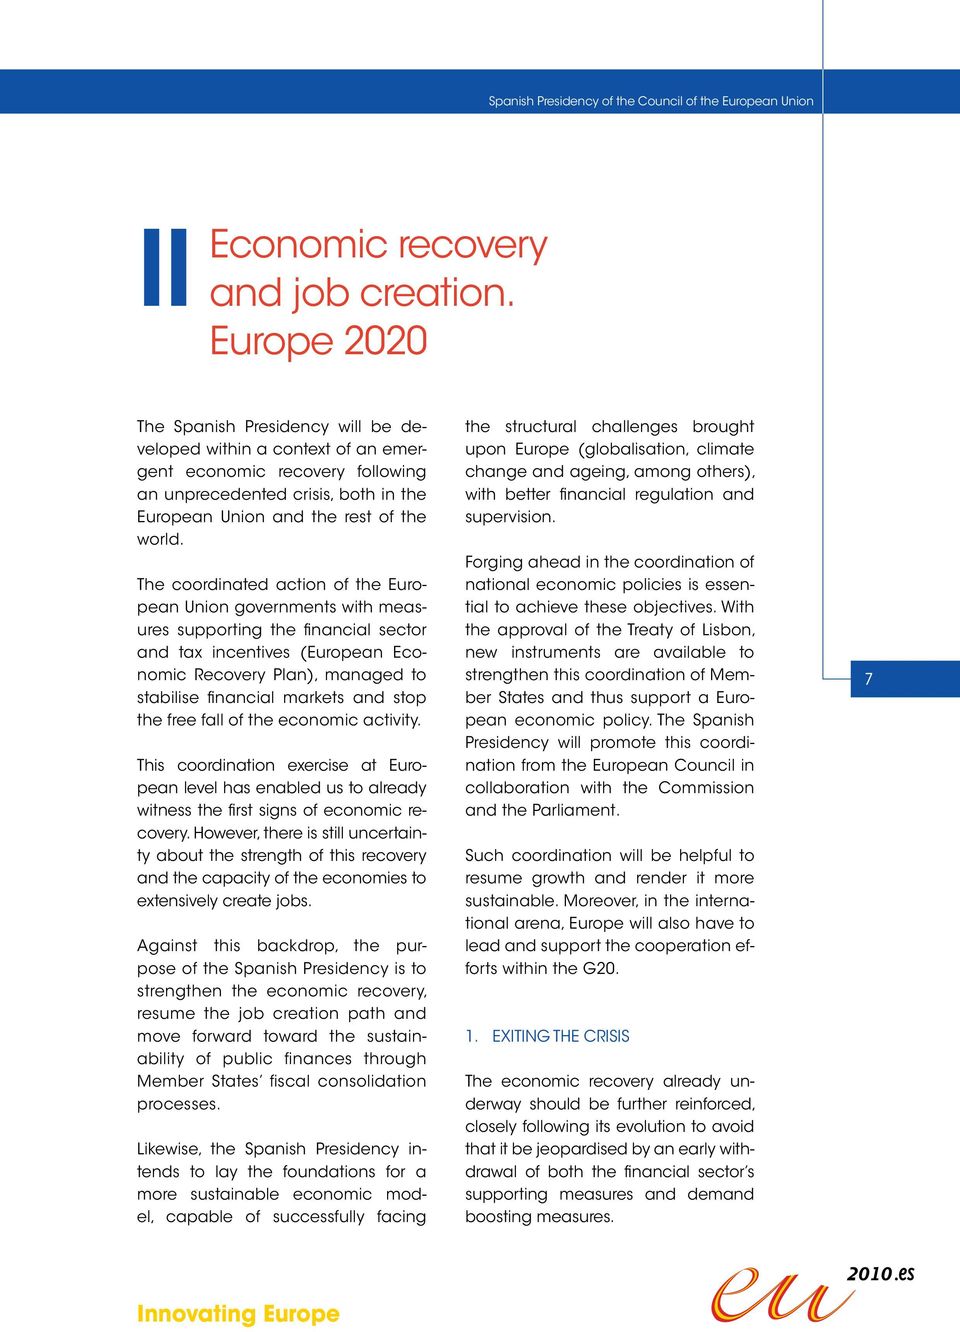 The coordinated action of the European Union governments with measures supporting the financial sector and tax incentives (European Economic Recovery Plan), managed to stabilise financial markets and